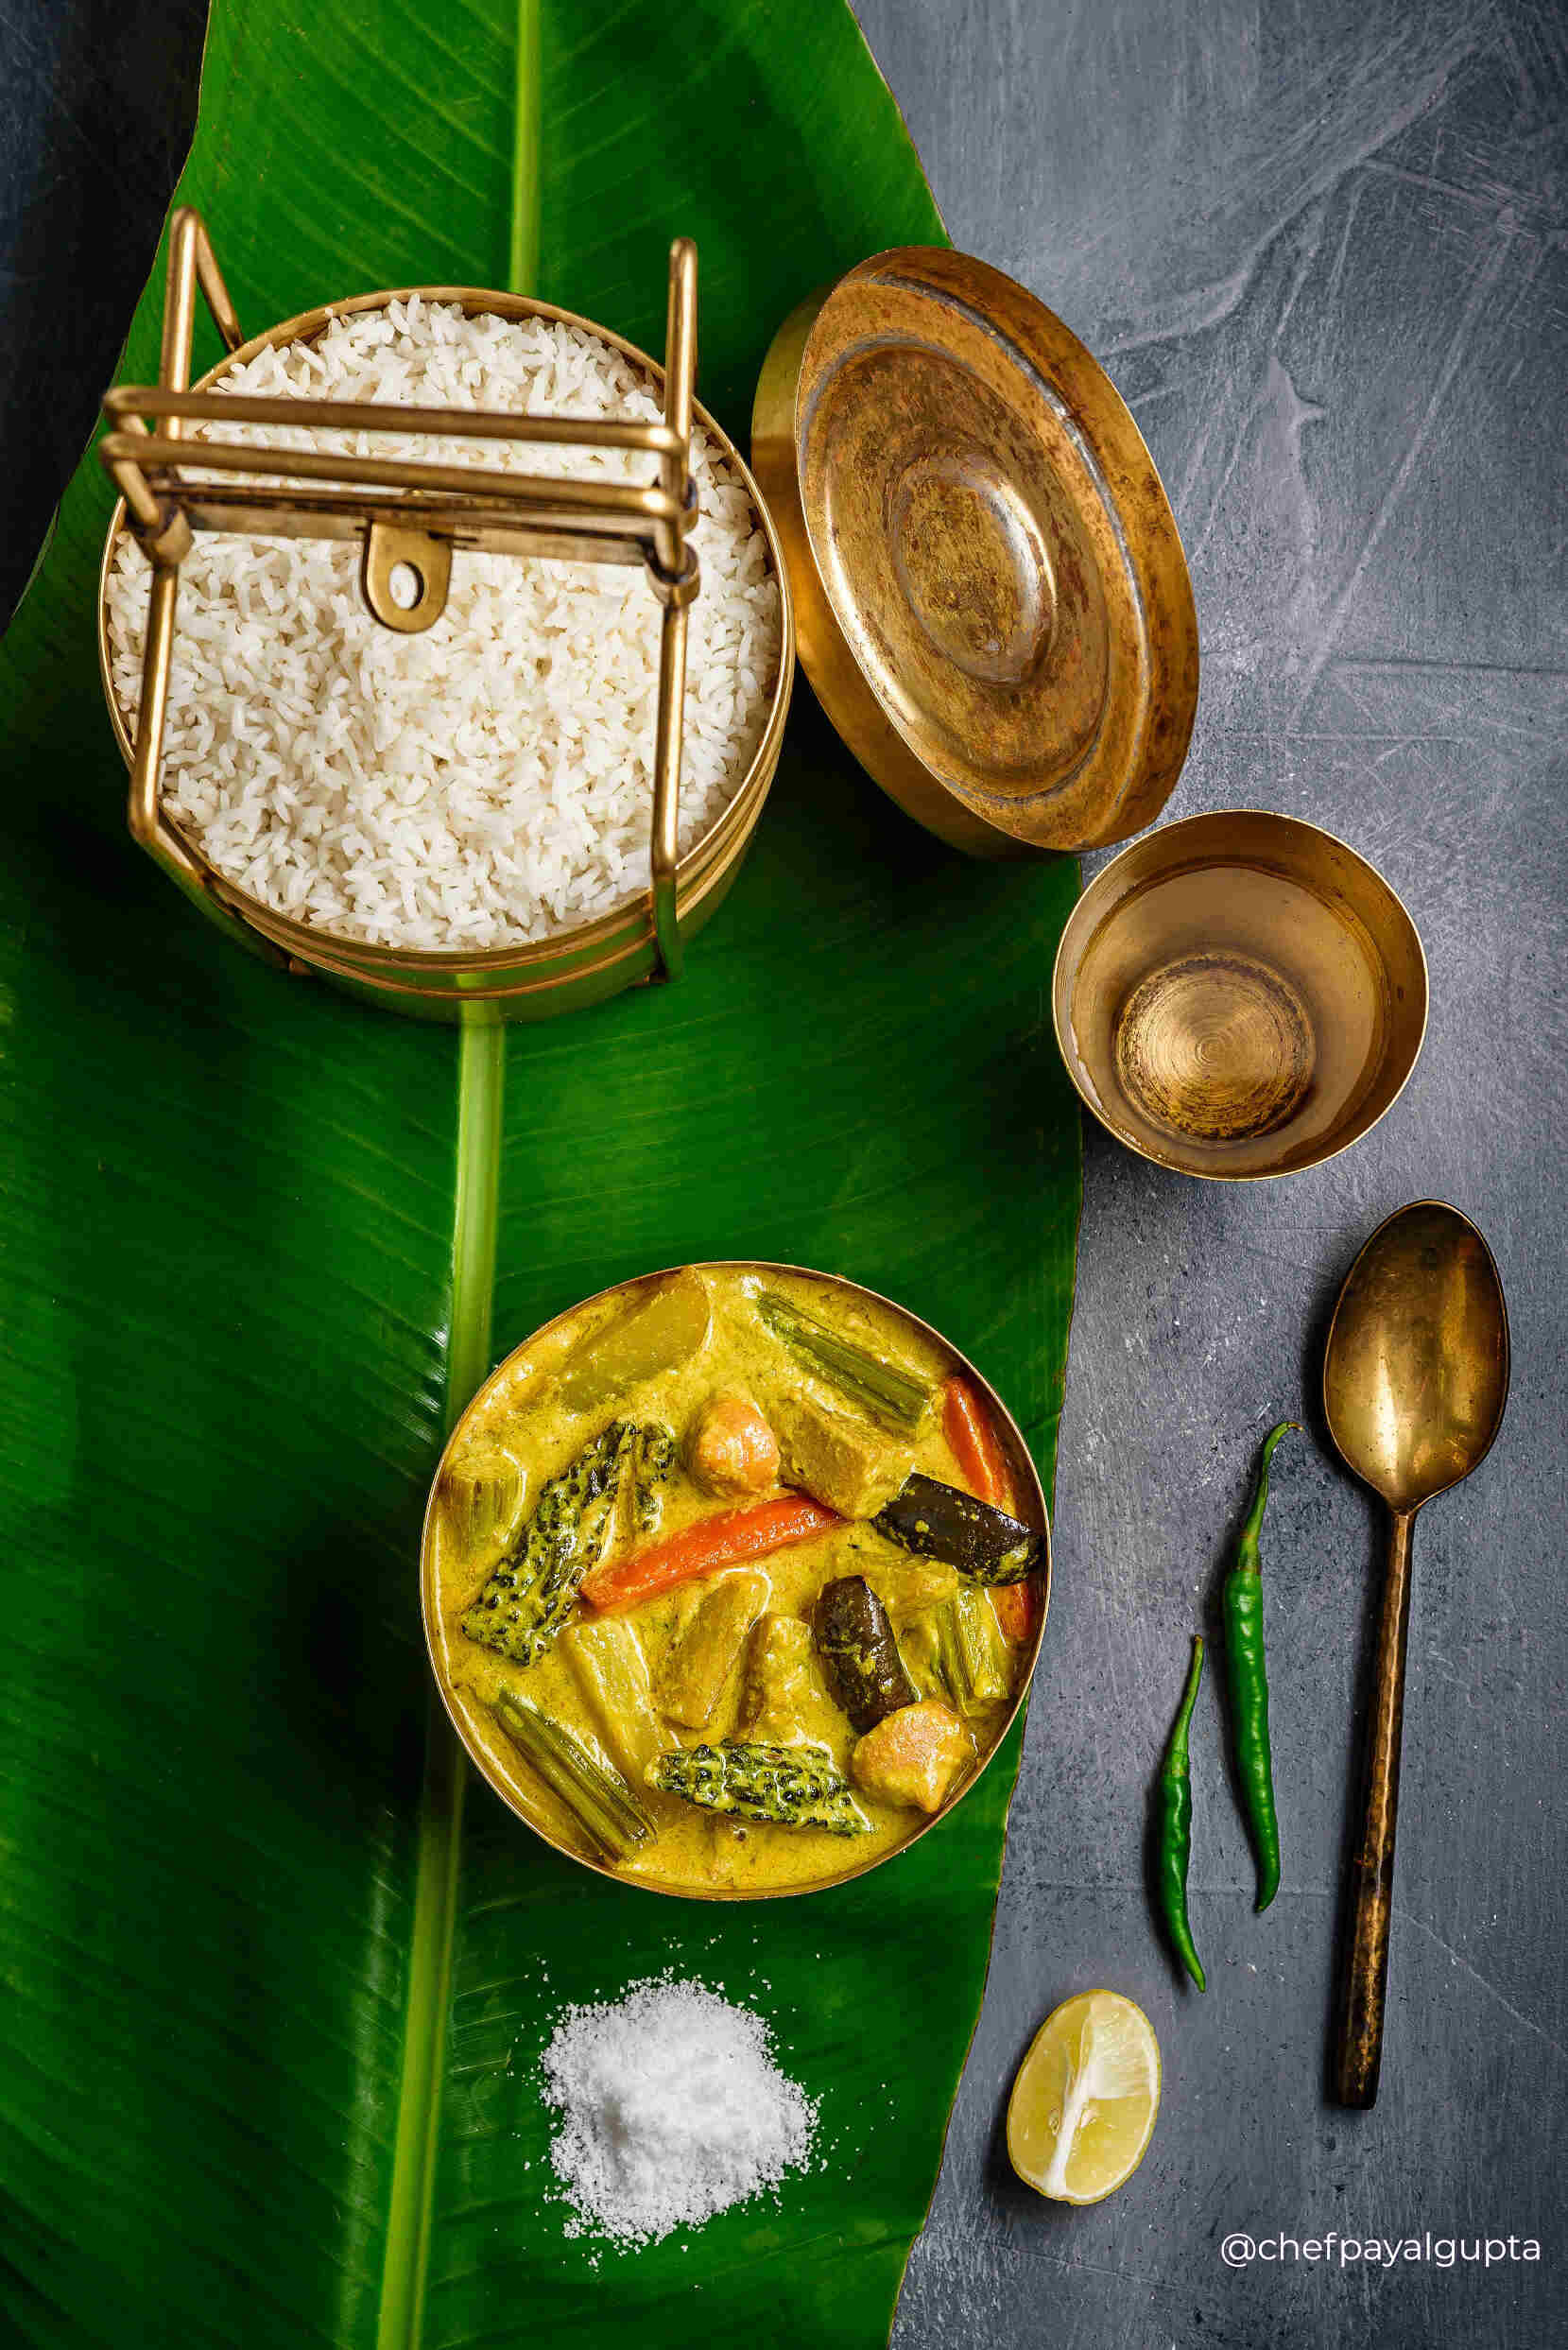 Shukto is a delightful vegetable dish in Bengali cuisine usually served with rice in the West Bengal. It is also a culinary experience for whoever eats it and a culinary achievement for whoever cooks it.